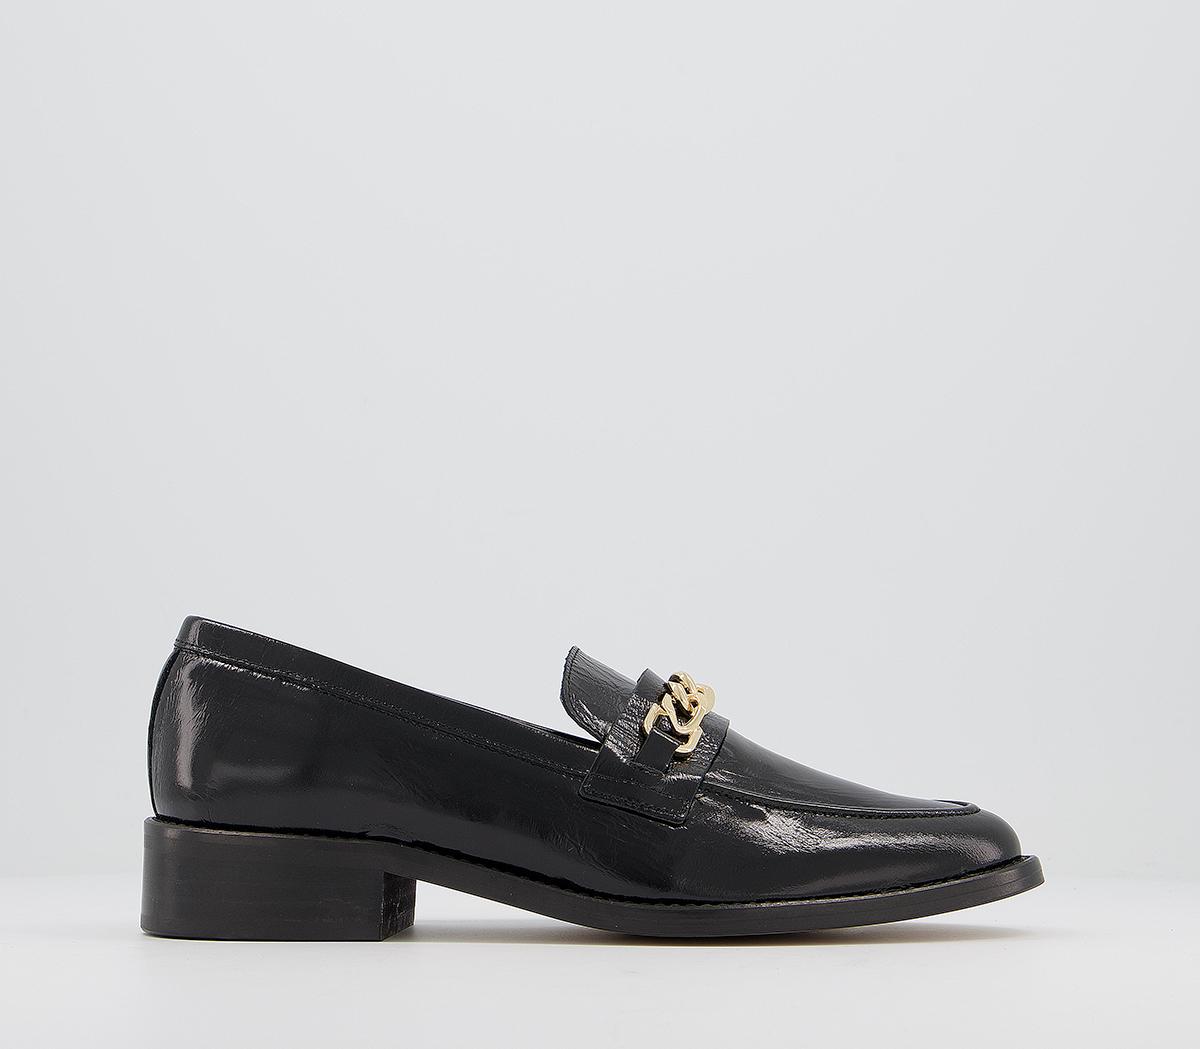 OFFICEFrida Chain Trim LoafersBlack Leather With Gold Hardware